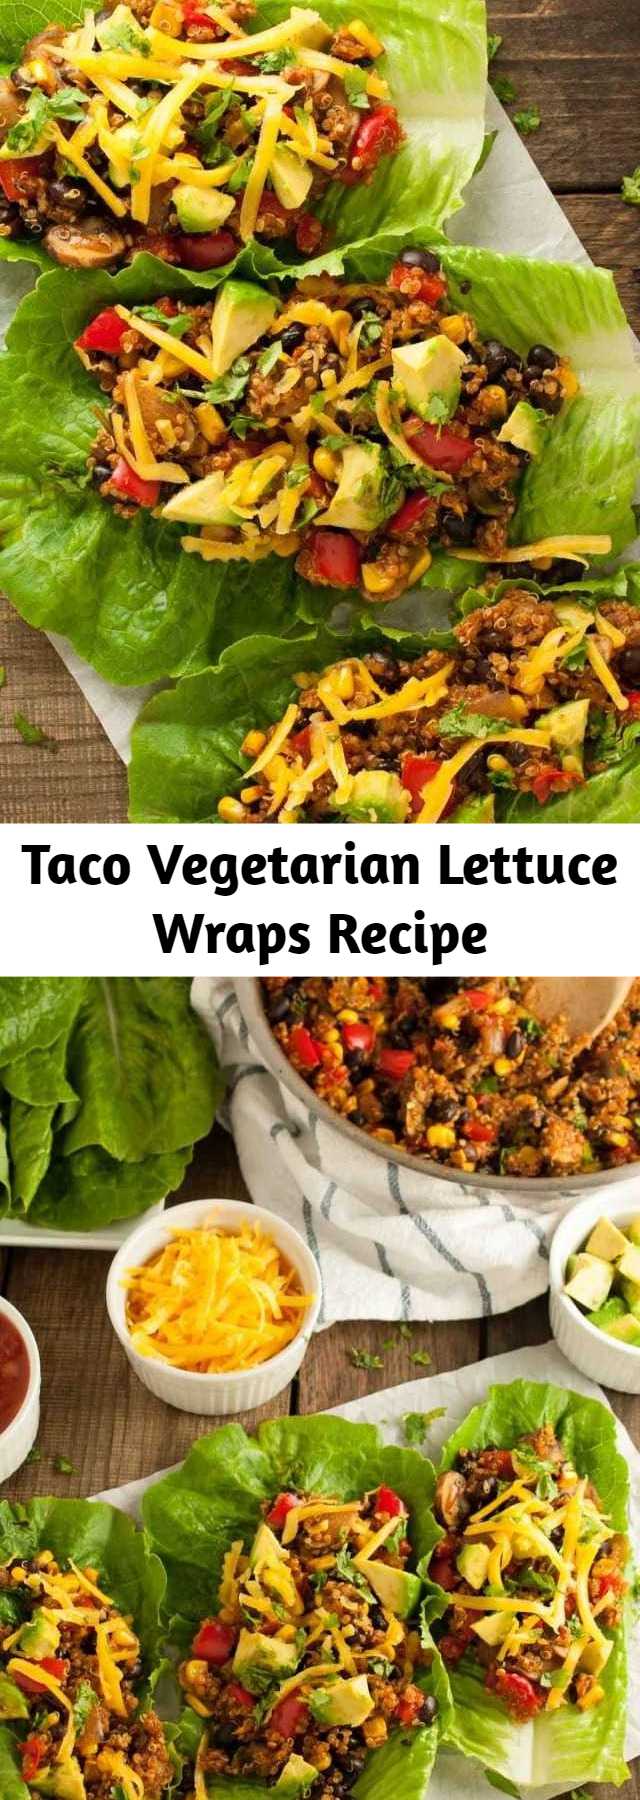 Taco Vegetarian Lettuce Wraps Recipe - Taco vegetarian lettuce wraps with quinoa and black beans put a tasty spin on tacos that will actually keep you full with 16 grams of protein per serving!